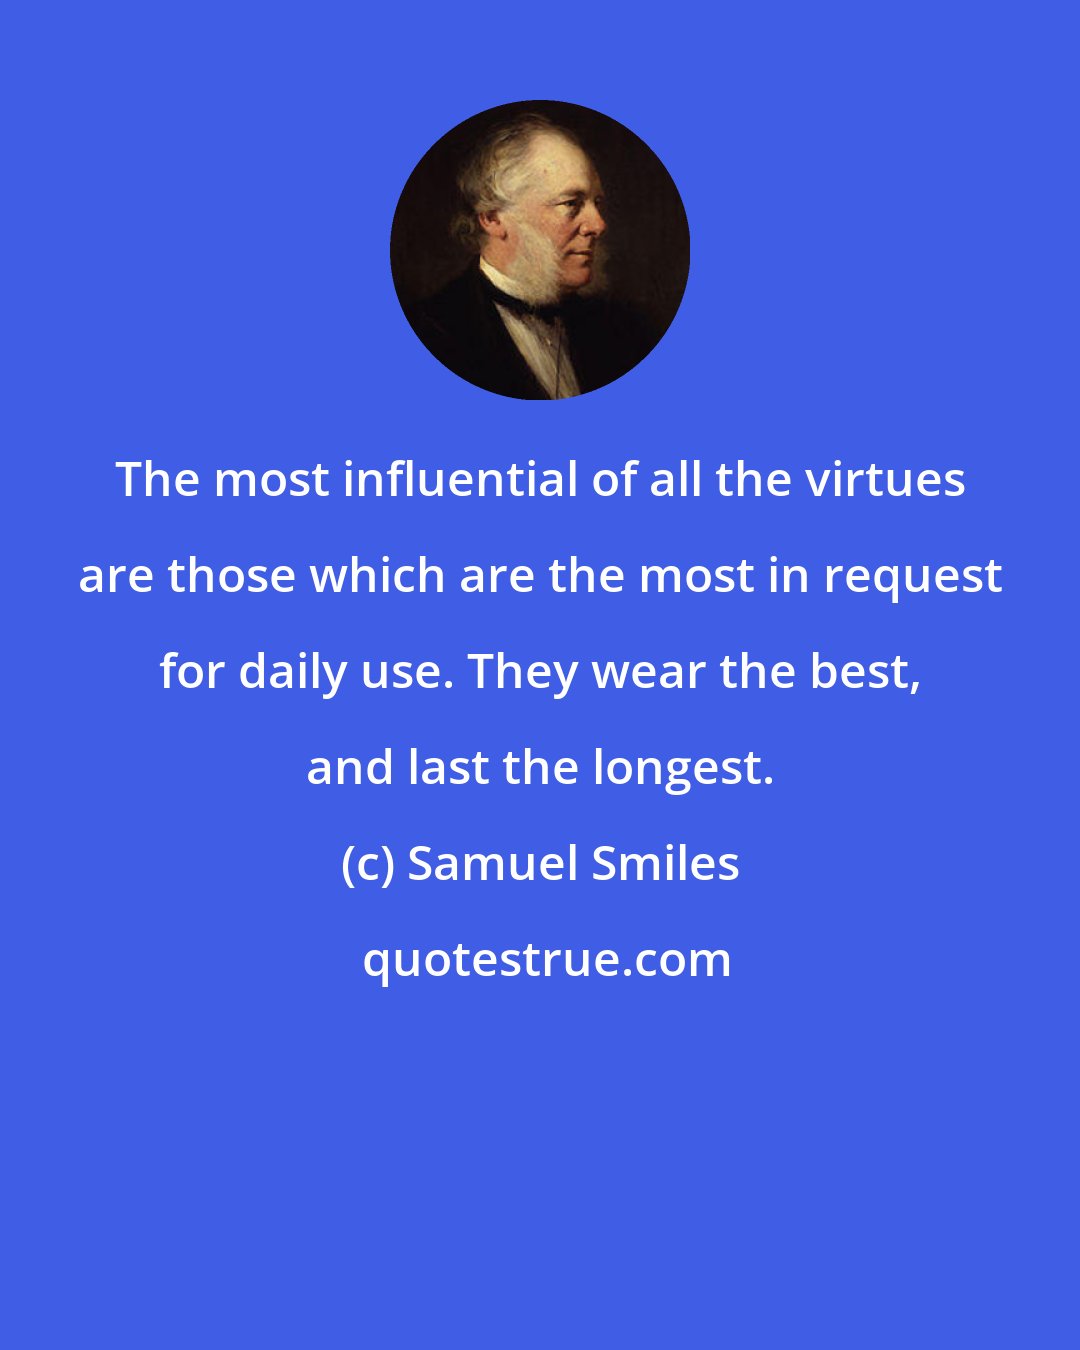 Samuel Smiles: The most influential of all the virtues are those which are the most in request for daily use. They wear the best, and last the longest.